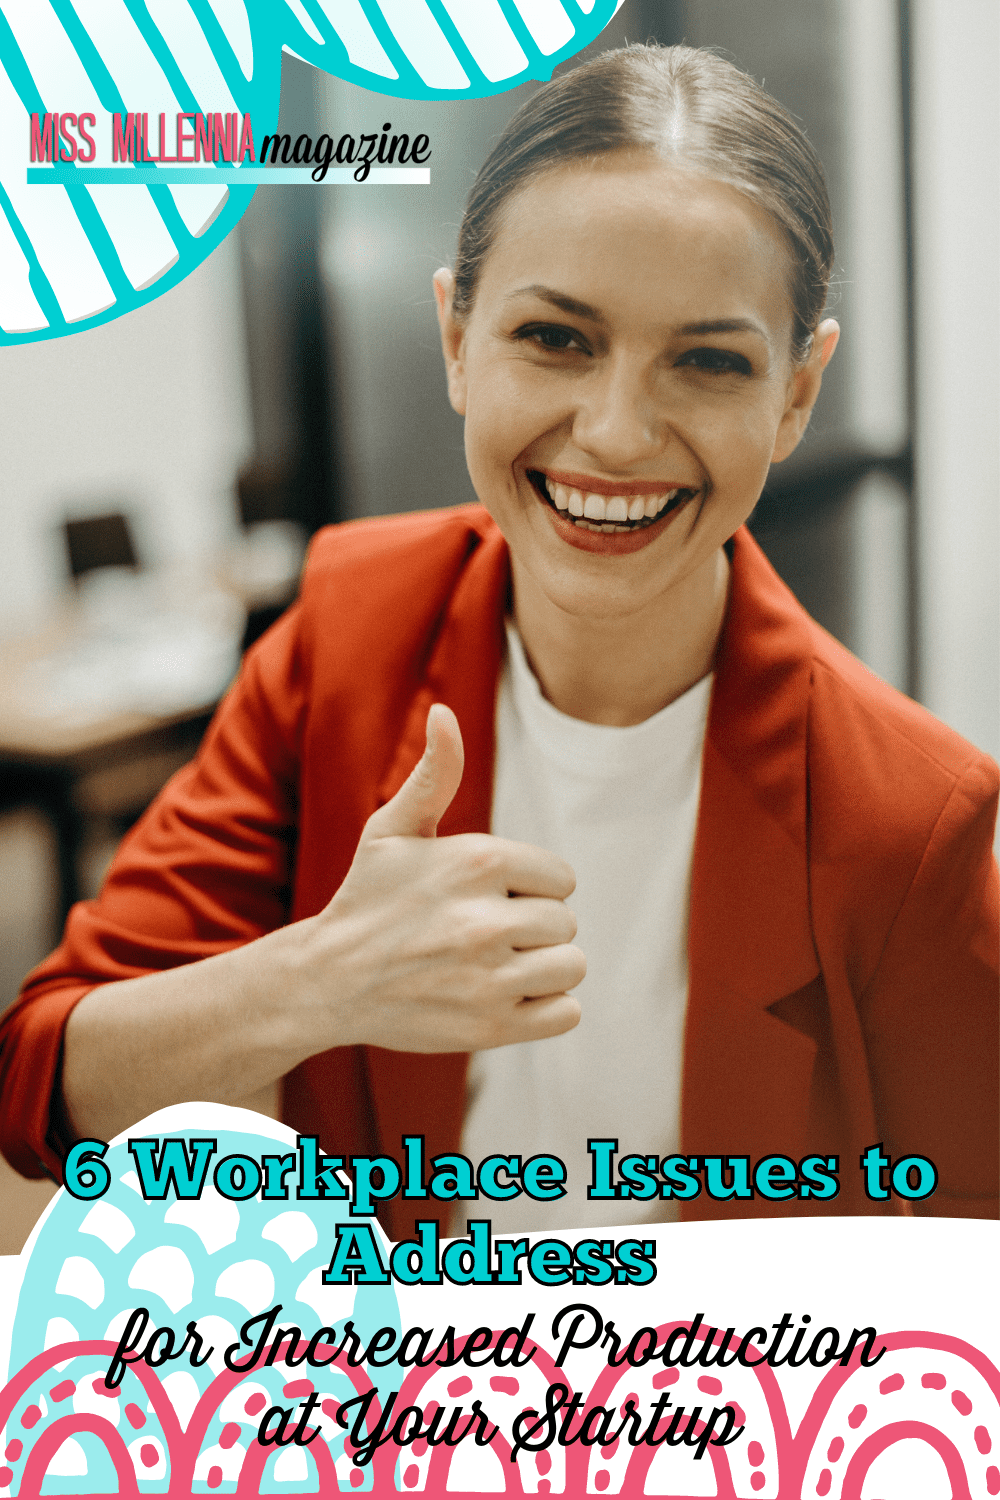 6 Workplace Issues to Address for Increased Production at Your Startup